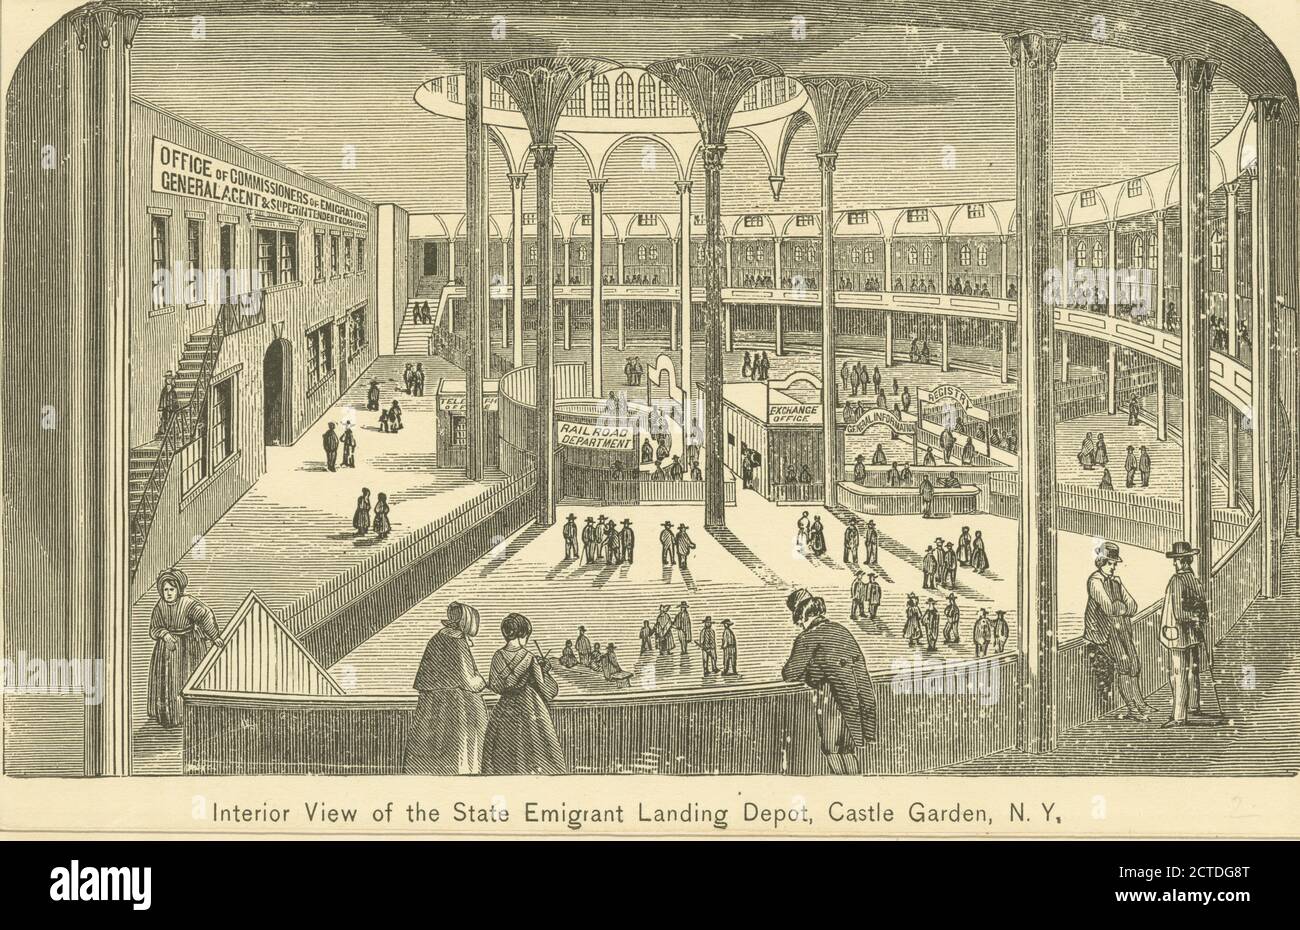 Interior view of the State Emigrant Landing Depot, Castle Garden, N.Y, still image, Prints, 1861 - 1880 Stock Photo